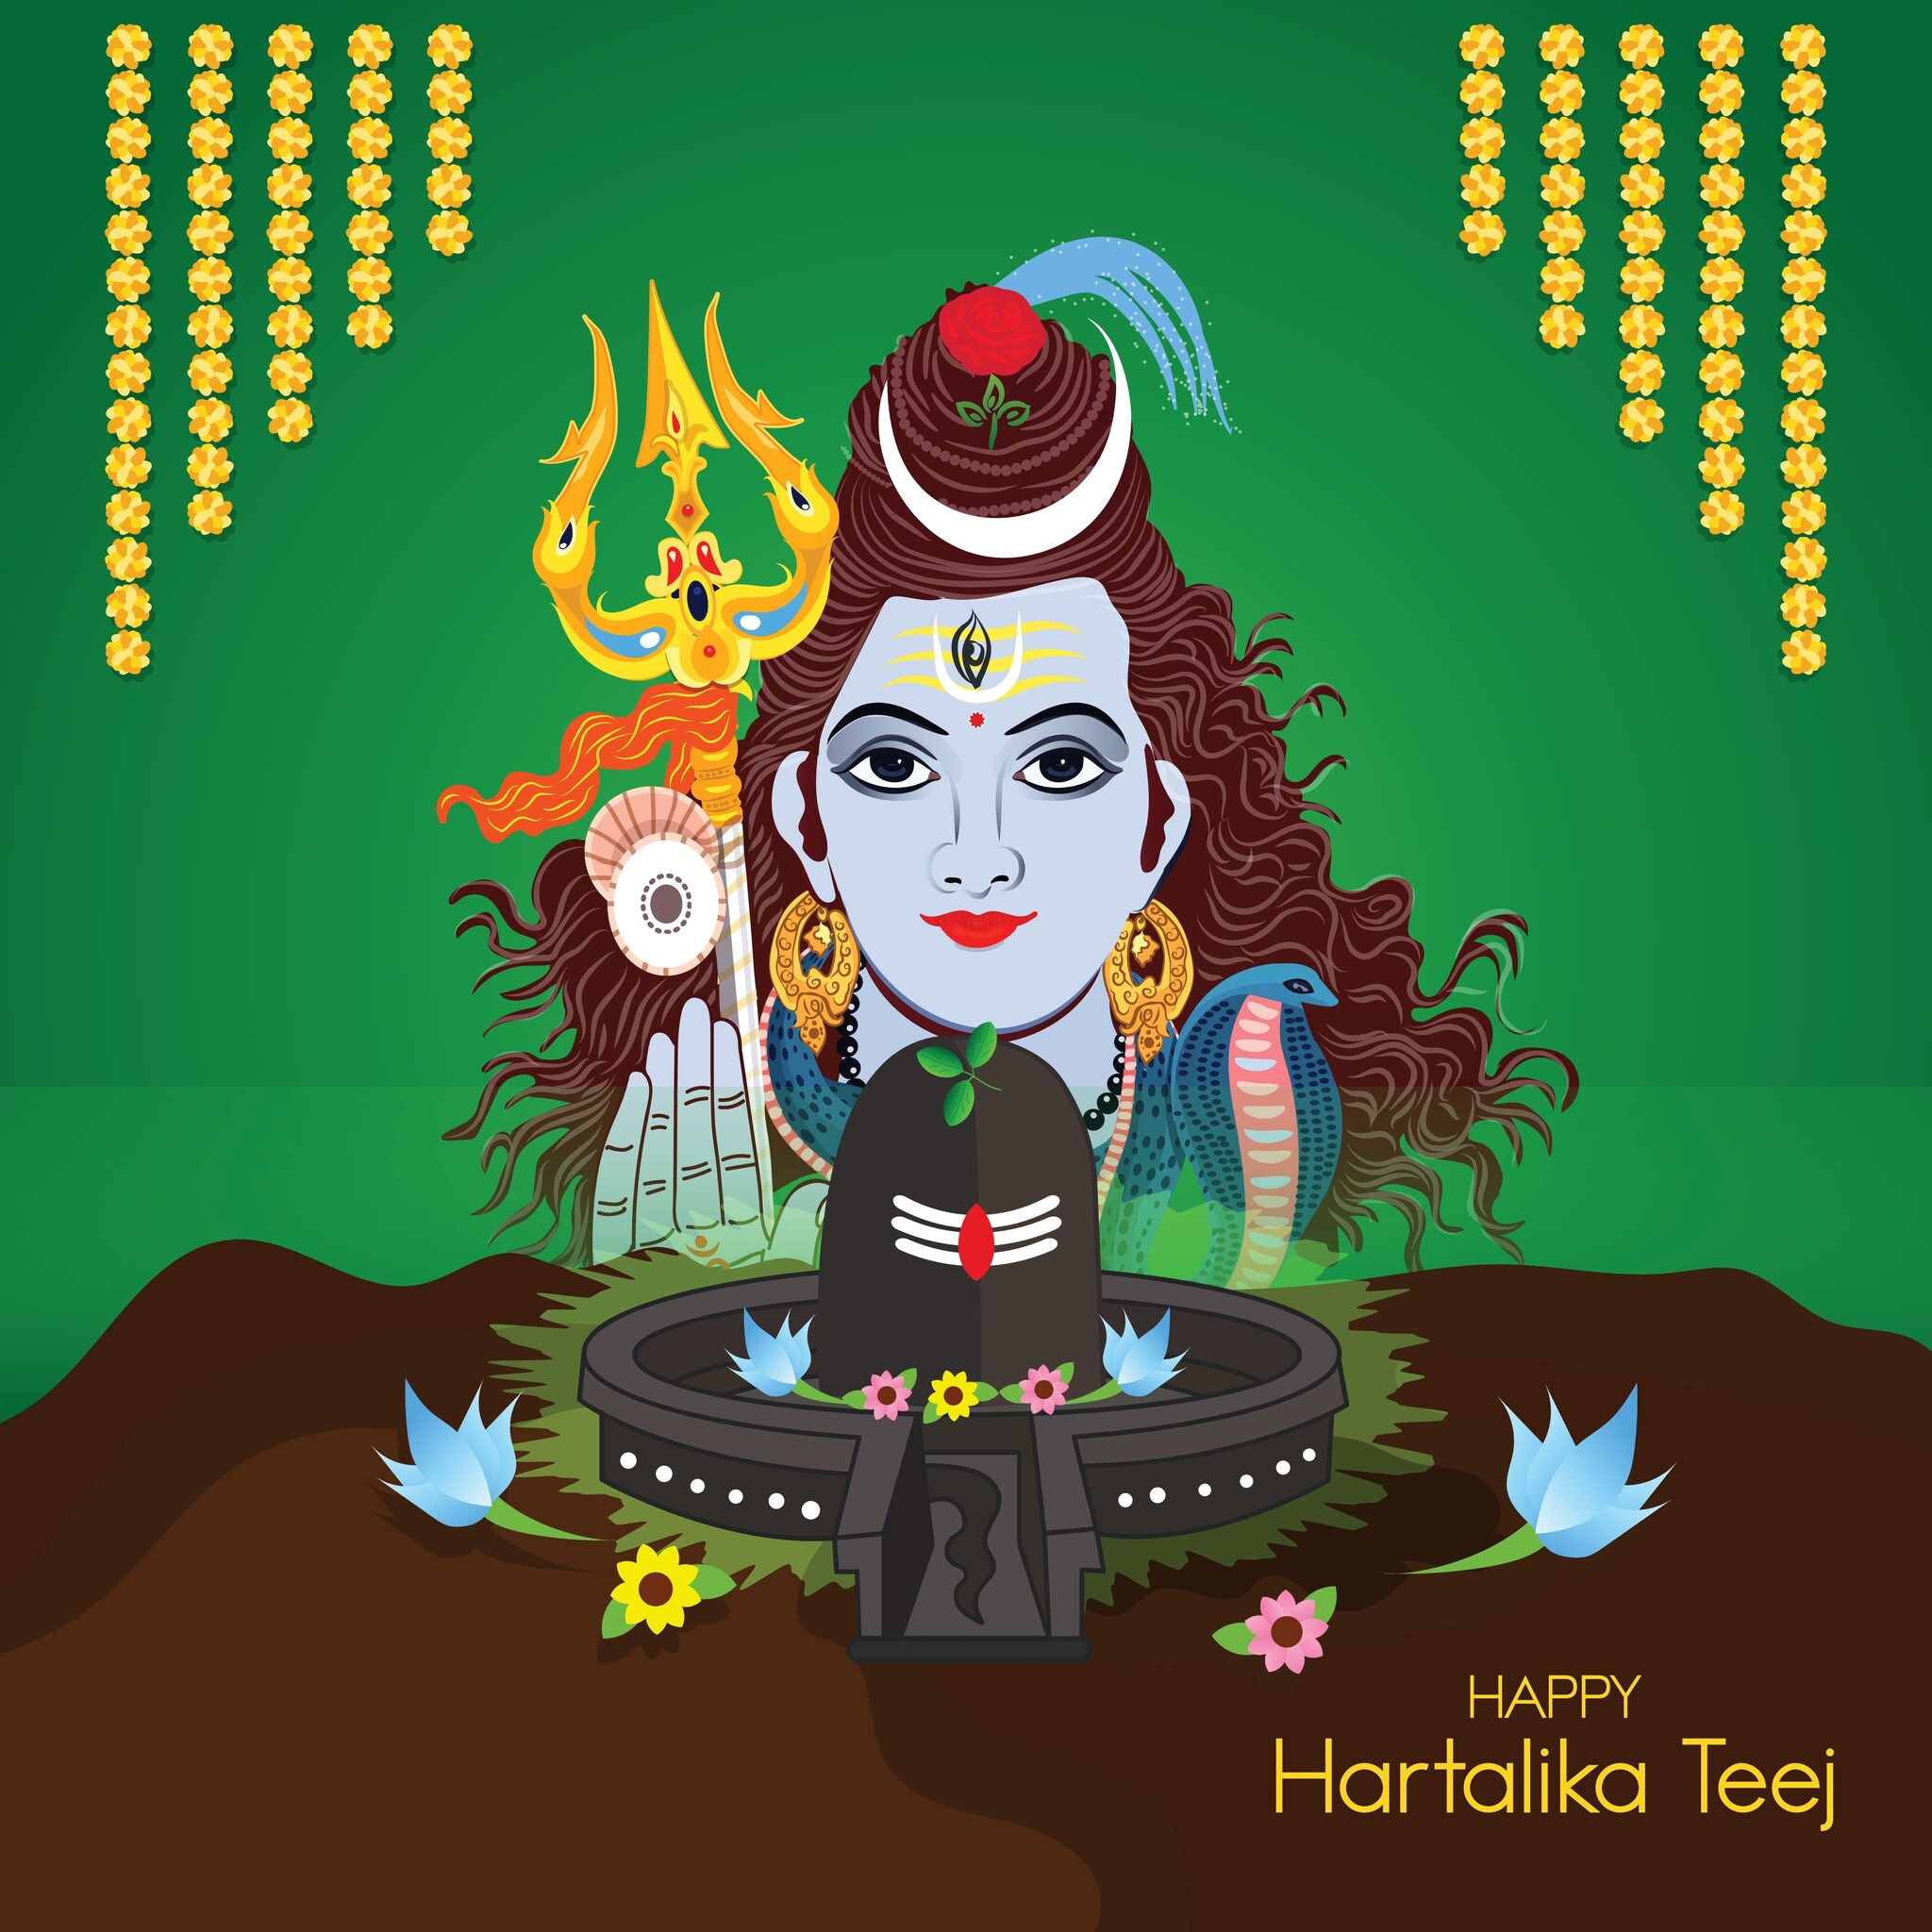 Happy Hartalika Teej 2022: Images, Wishes, Quotes, Messages and WhatsApp Greetings to Share. (Image: Shutterstock)